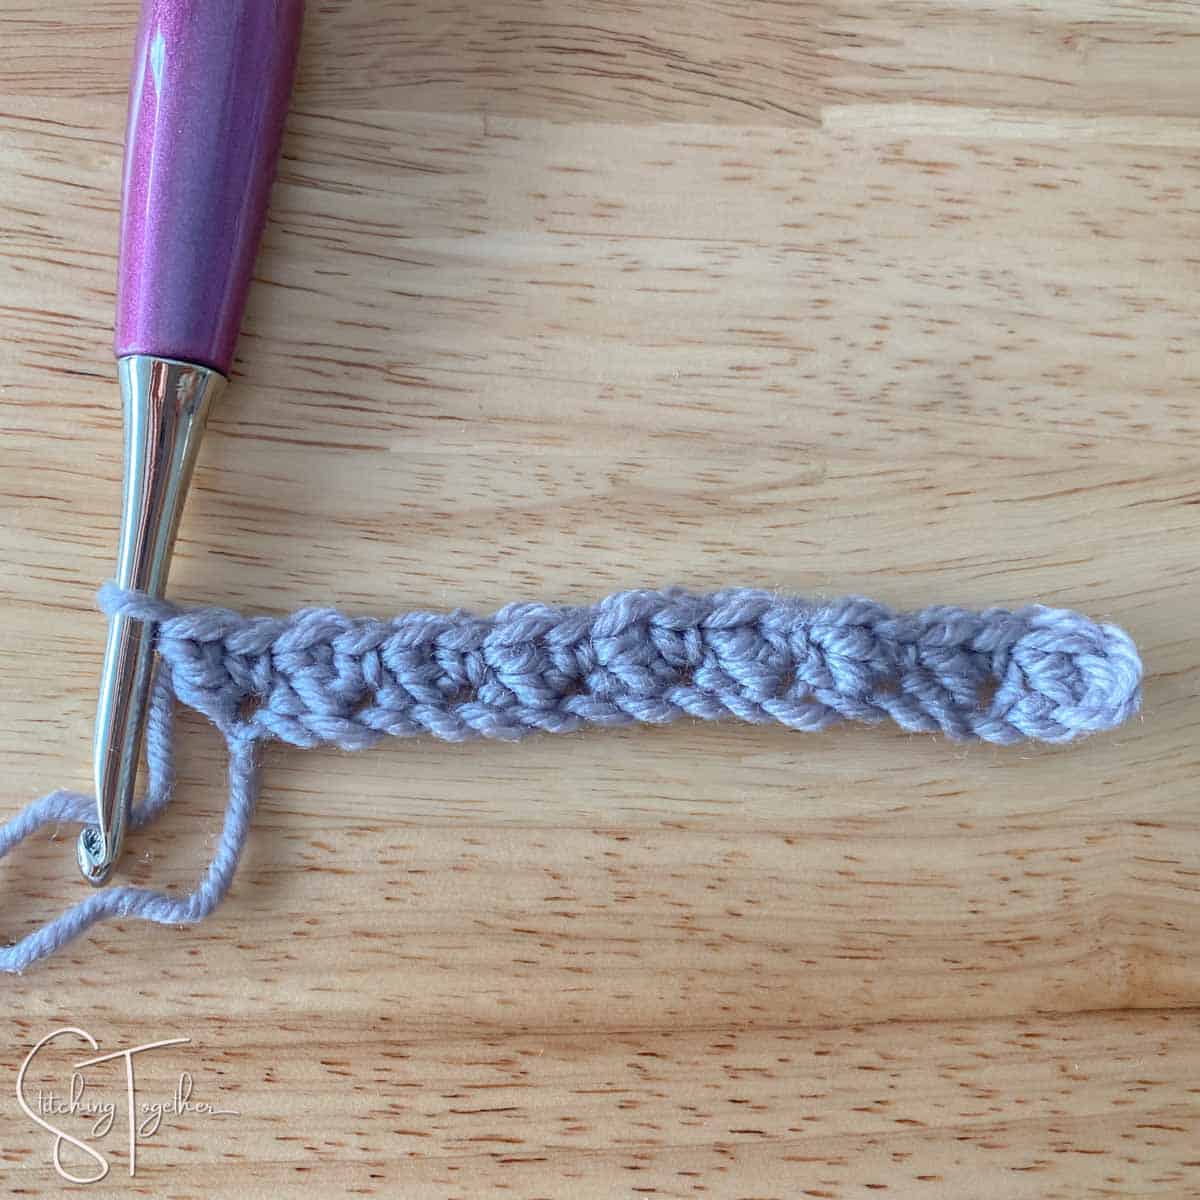 hook and yarn showing row 1 of suzette stitch crochet completed